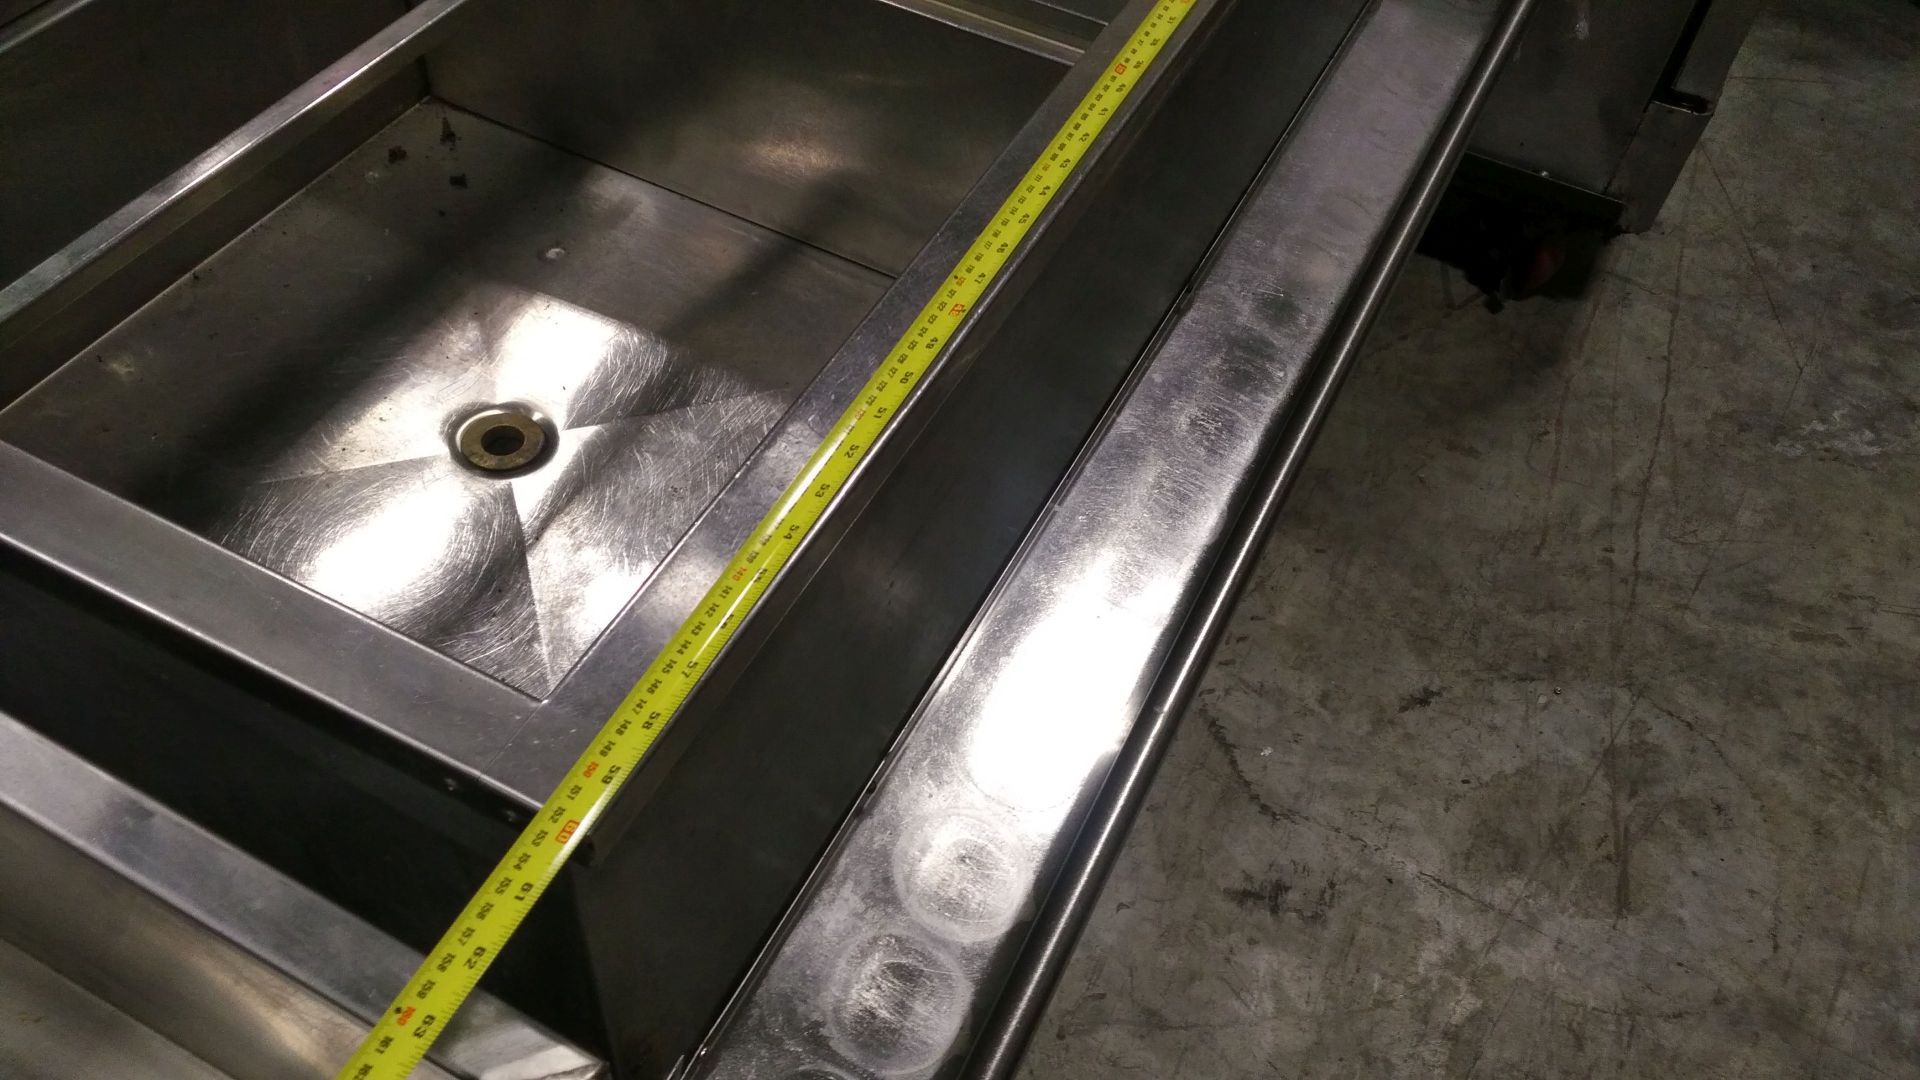 60" x 30" Bar Sink with Speed Rail - Image 3 of 7